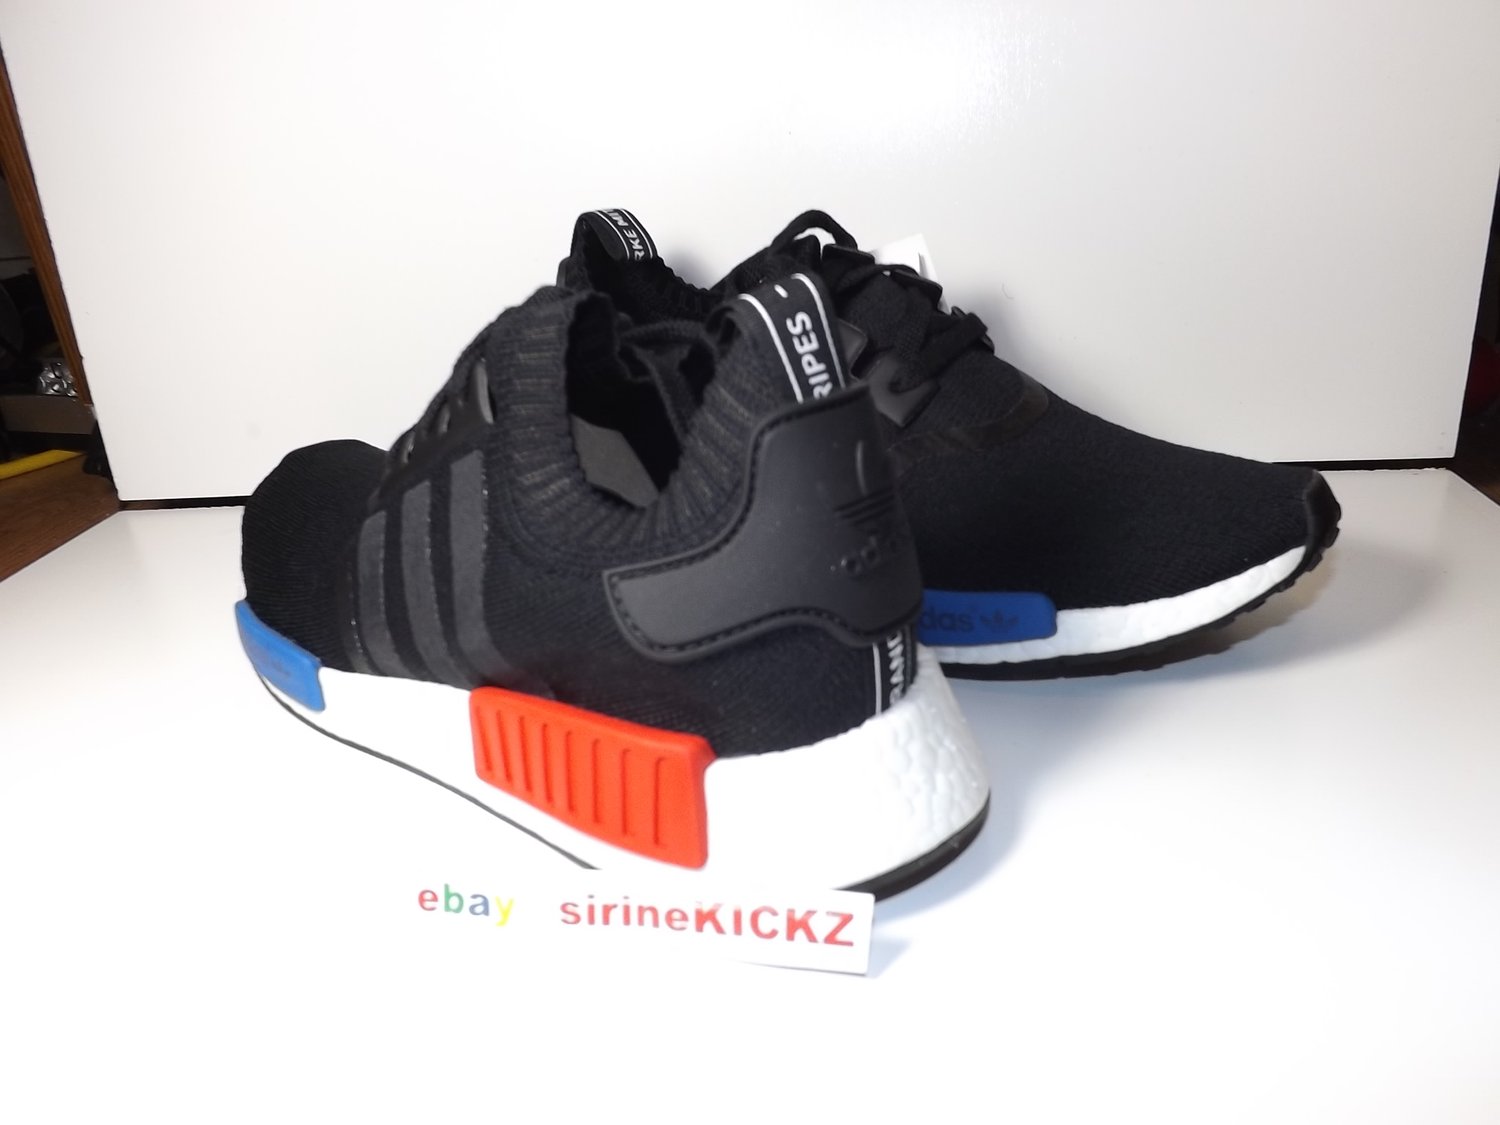 Image of Adidas NMD Nomad Runner Primeknit Boost Black Red Blue S79168 SIZE 7.5